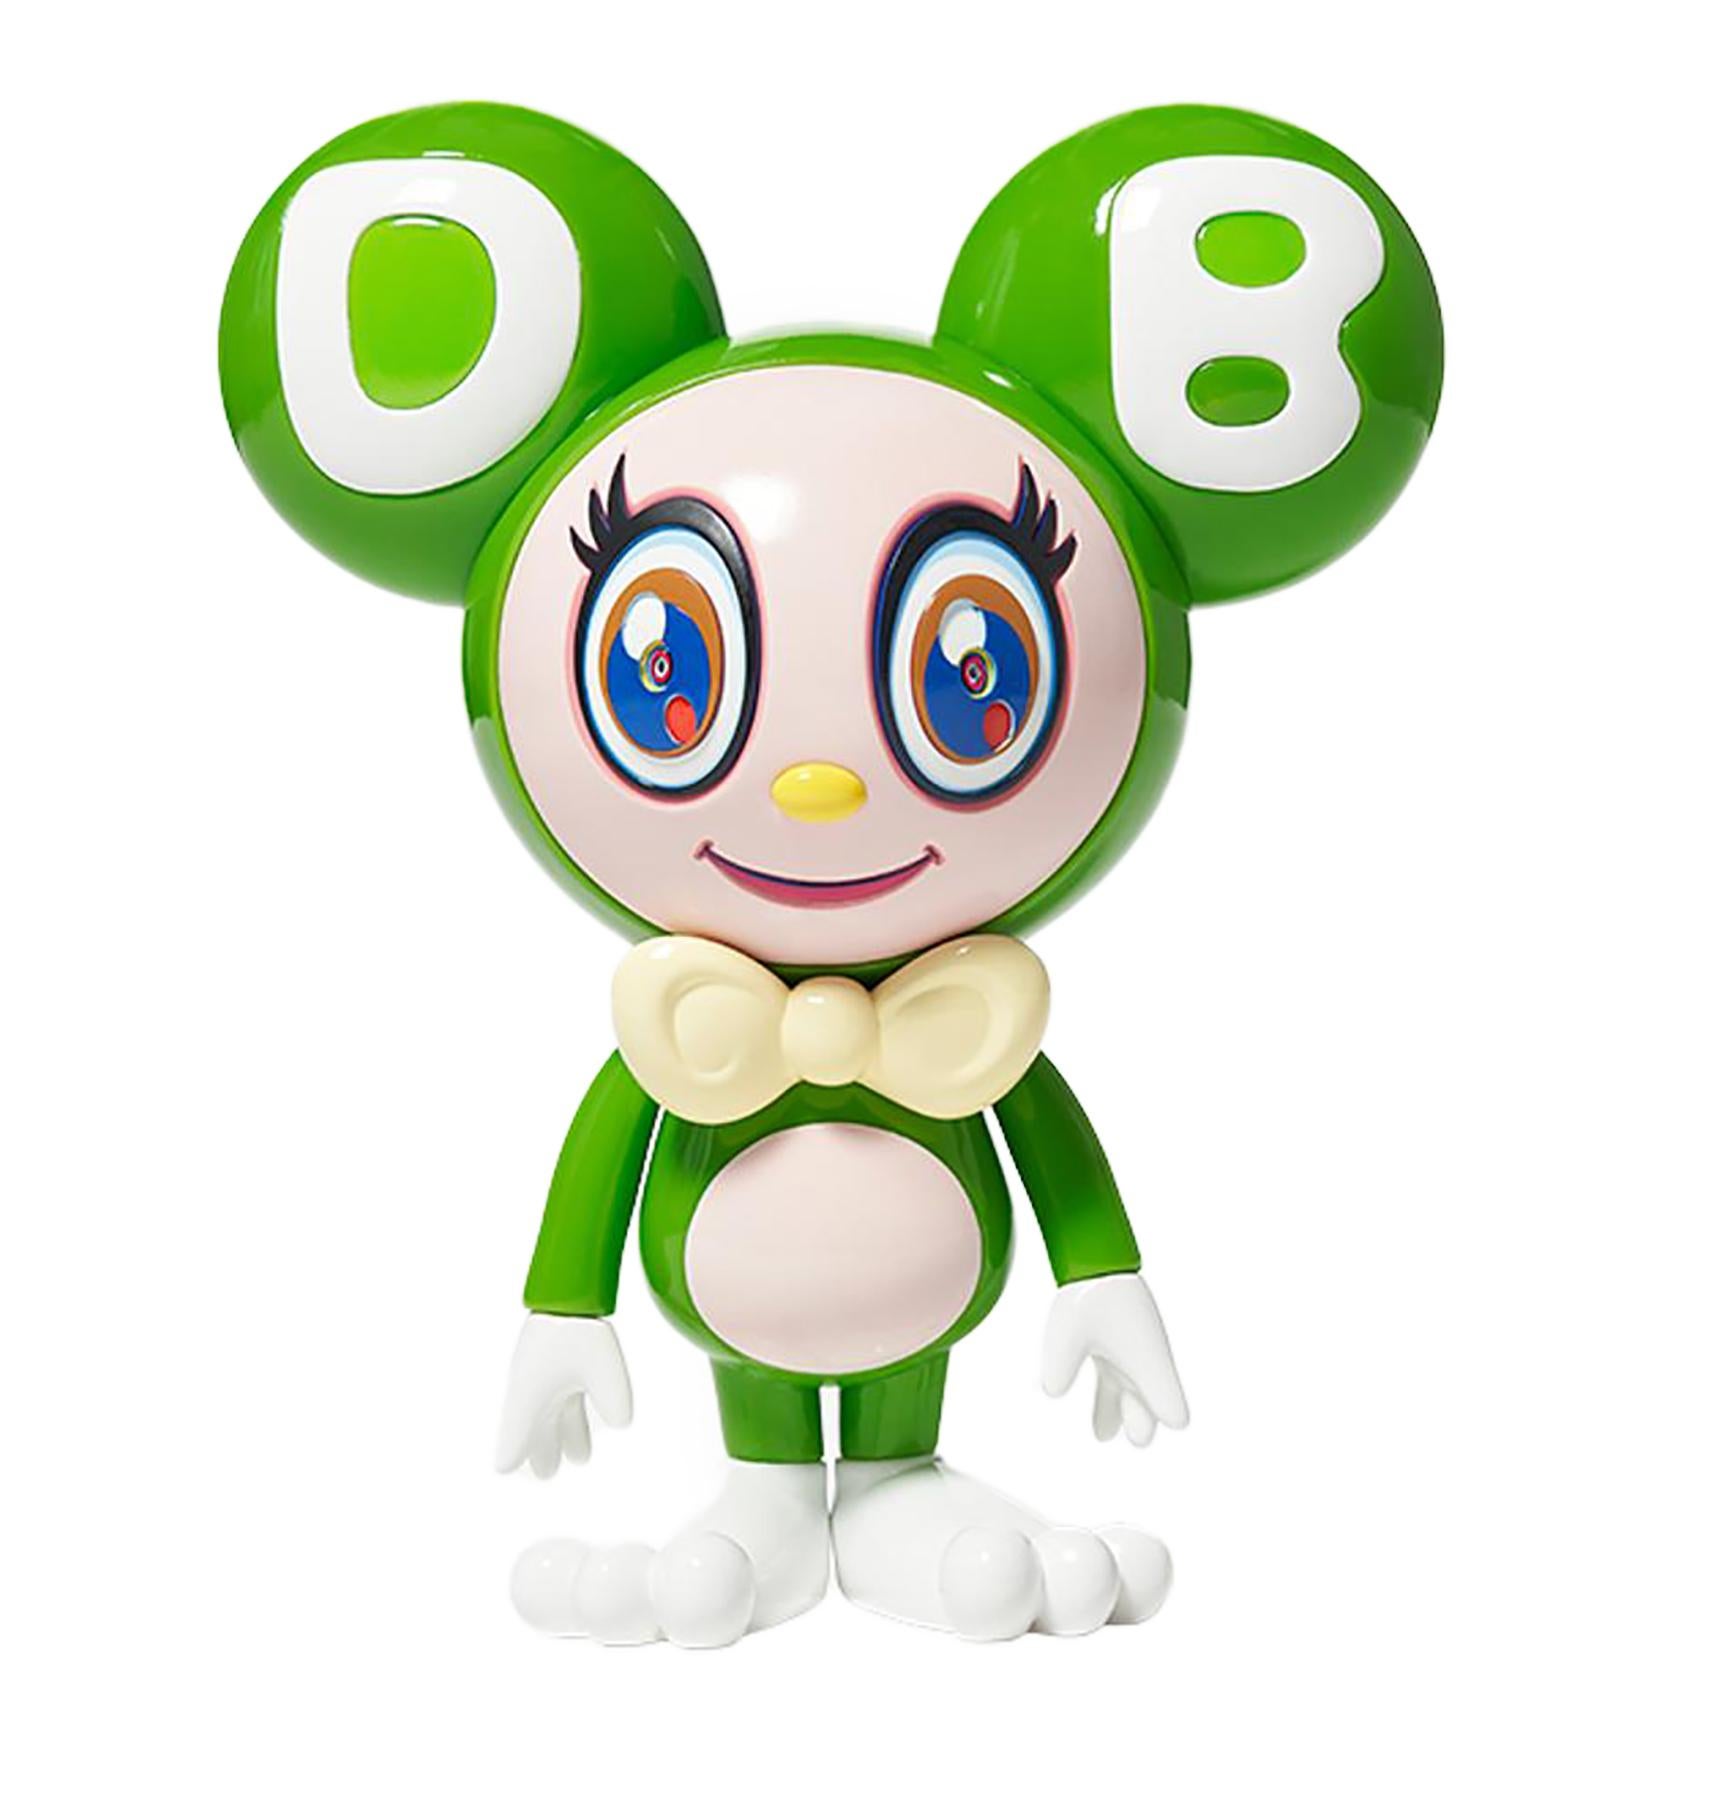 Takashi Murakami DOB-kun Figure (Takashi Murakami Mr. Dob) set of 4 works:
Limited edition Takashi Murakami Mr. DOB art toys featuring the artist's iconic DOB character. DOB-kun’s name, defined in his rounded ears and face, is the first three